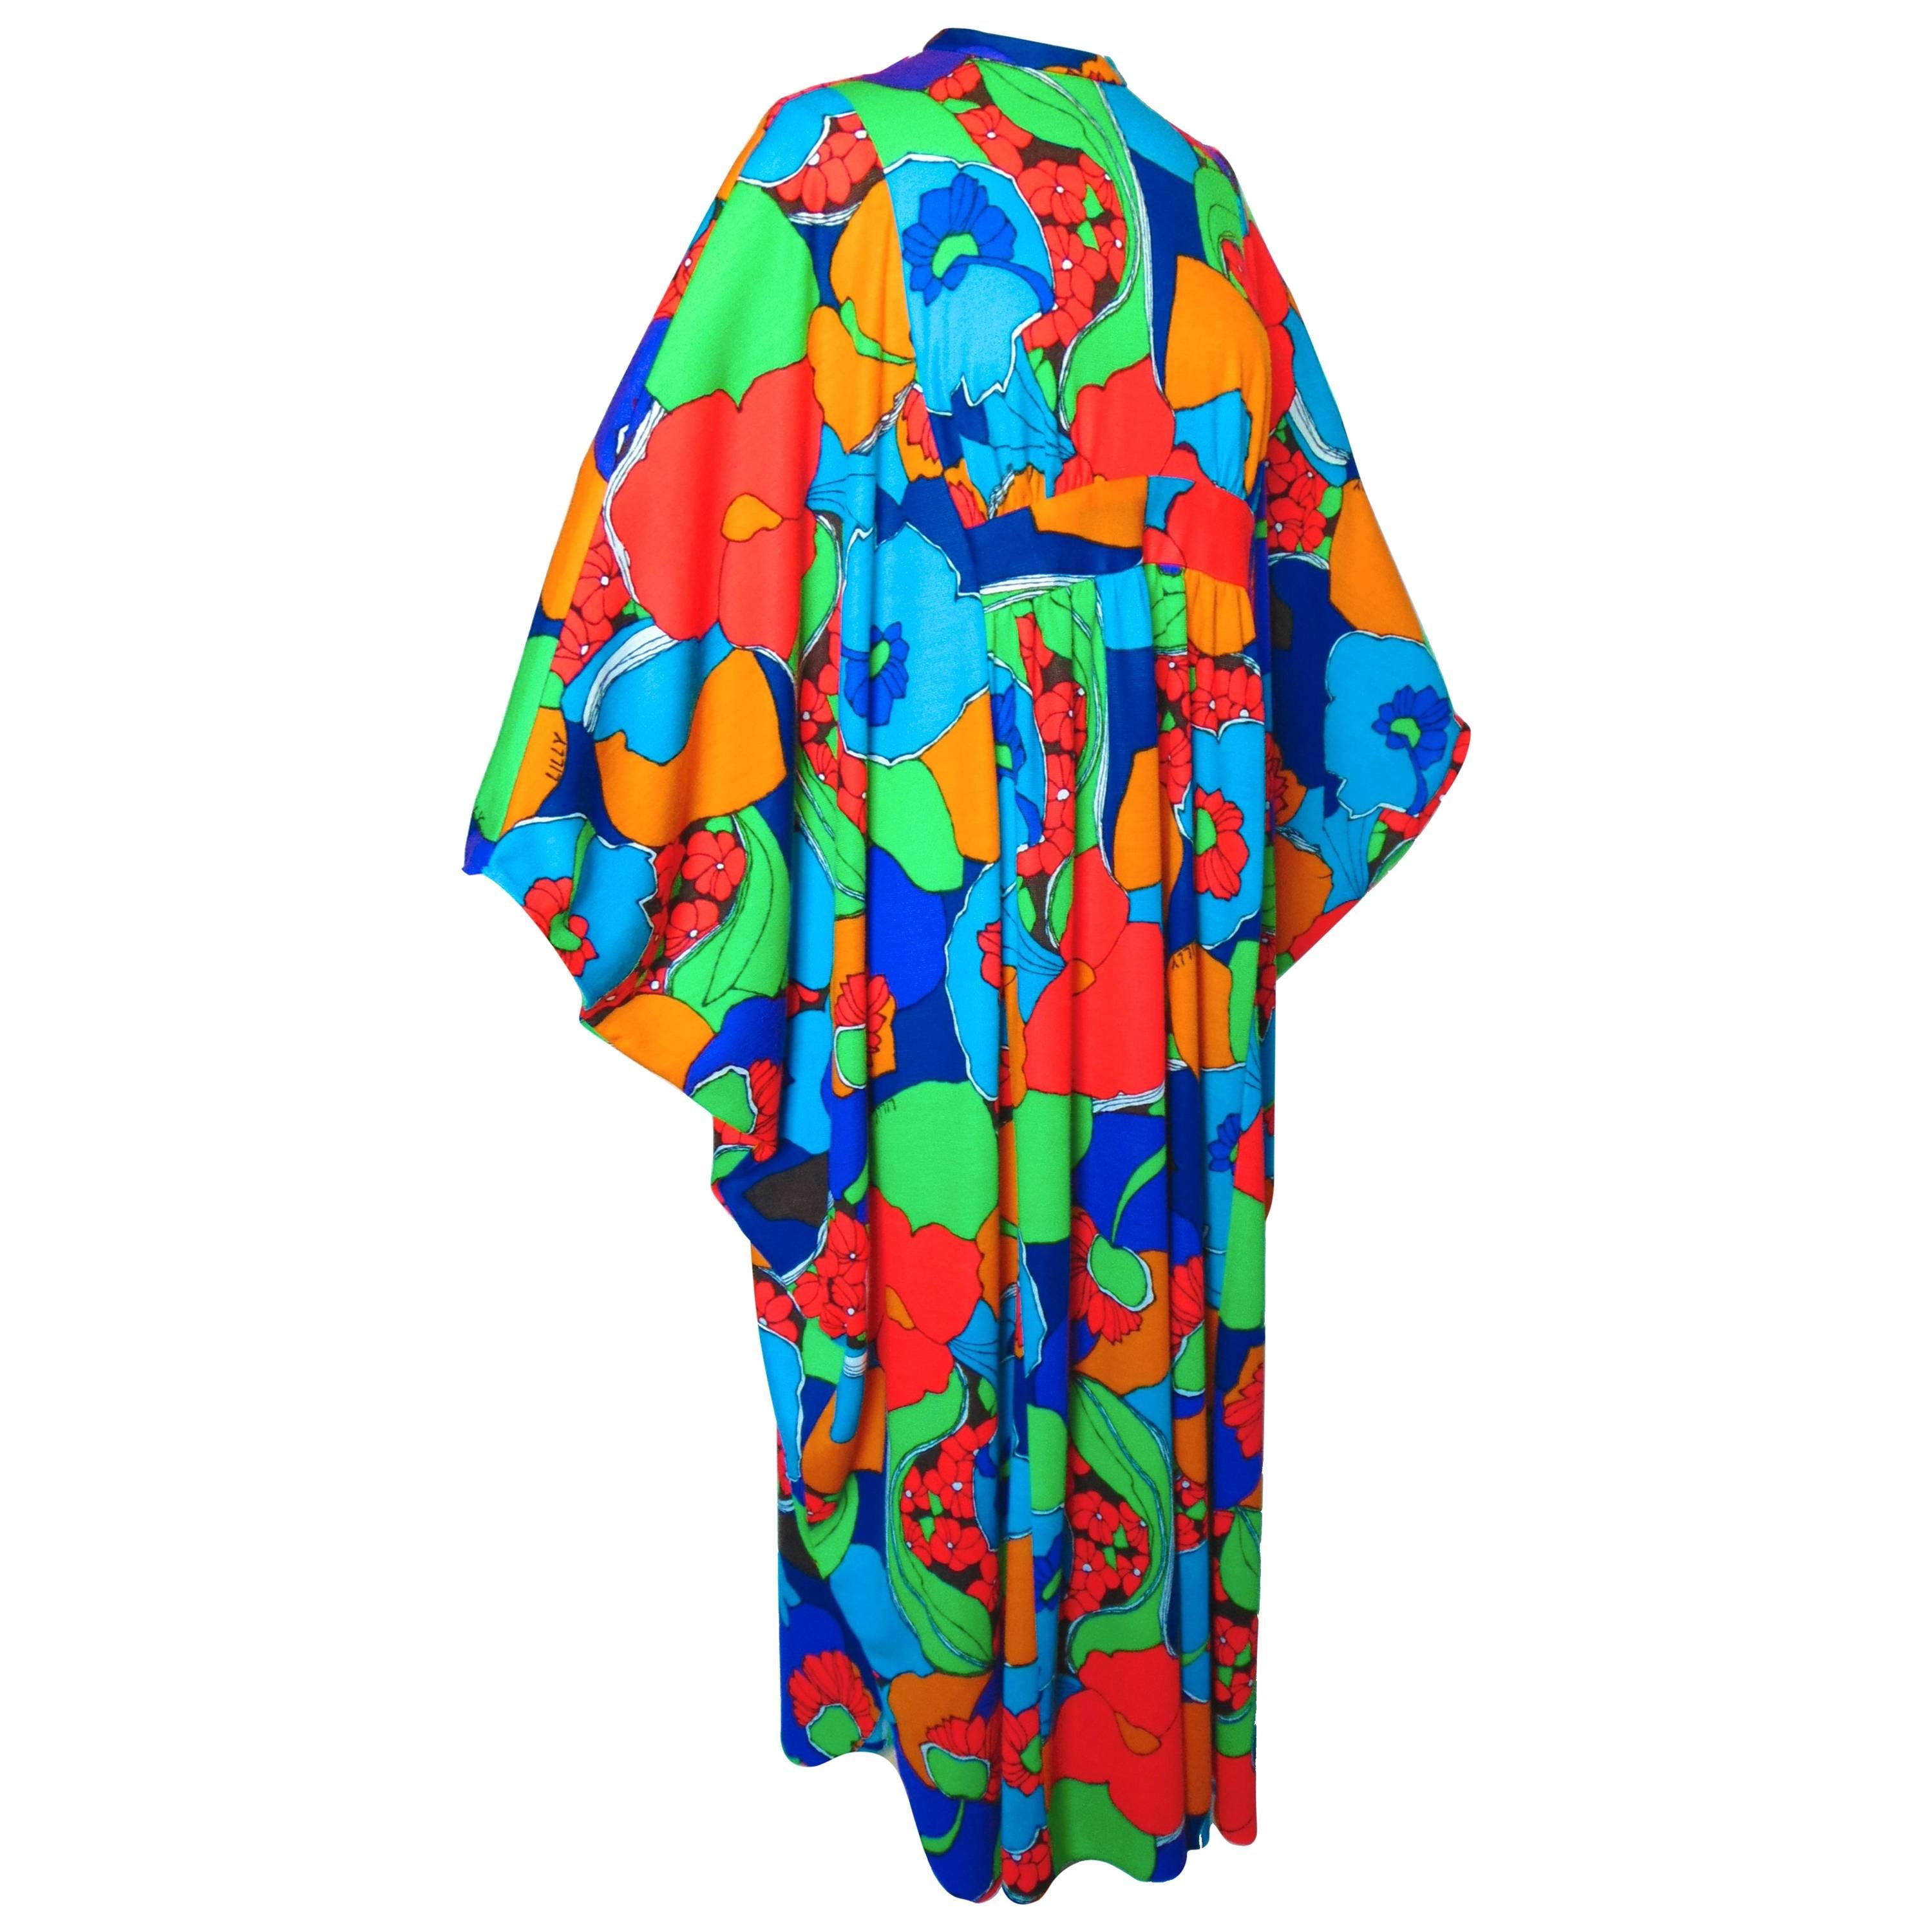 Lilly Pulitzer Kaftan Dress Vibrant Graphic Floral Print One Size Fits Most 70s